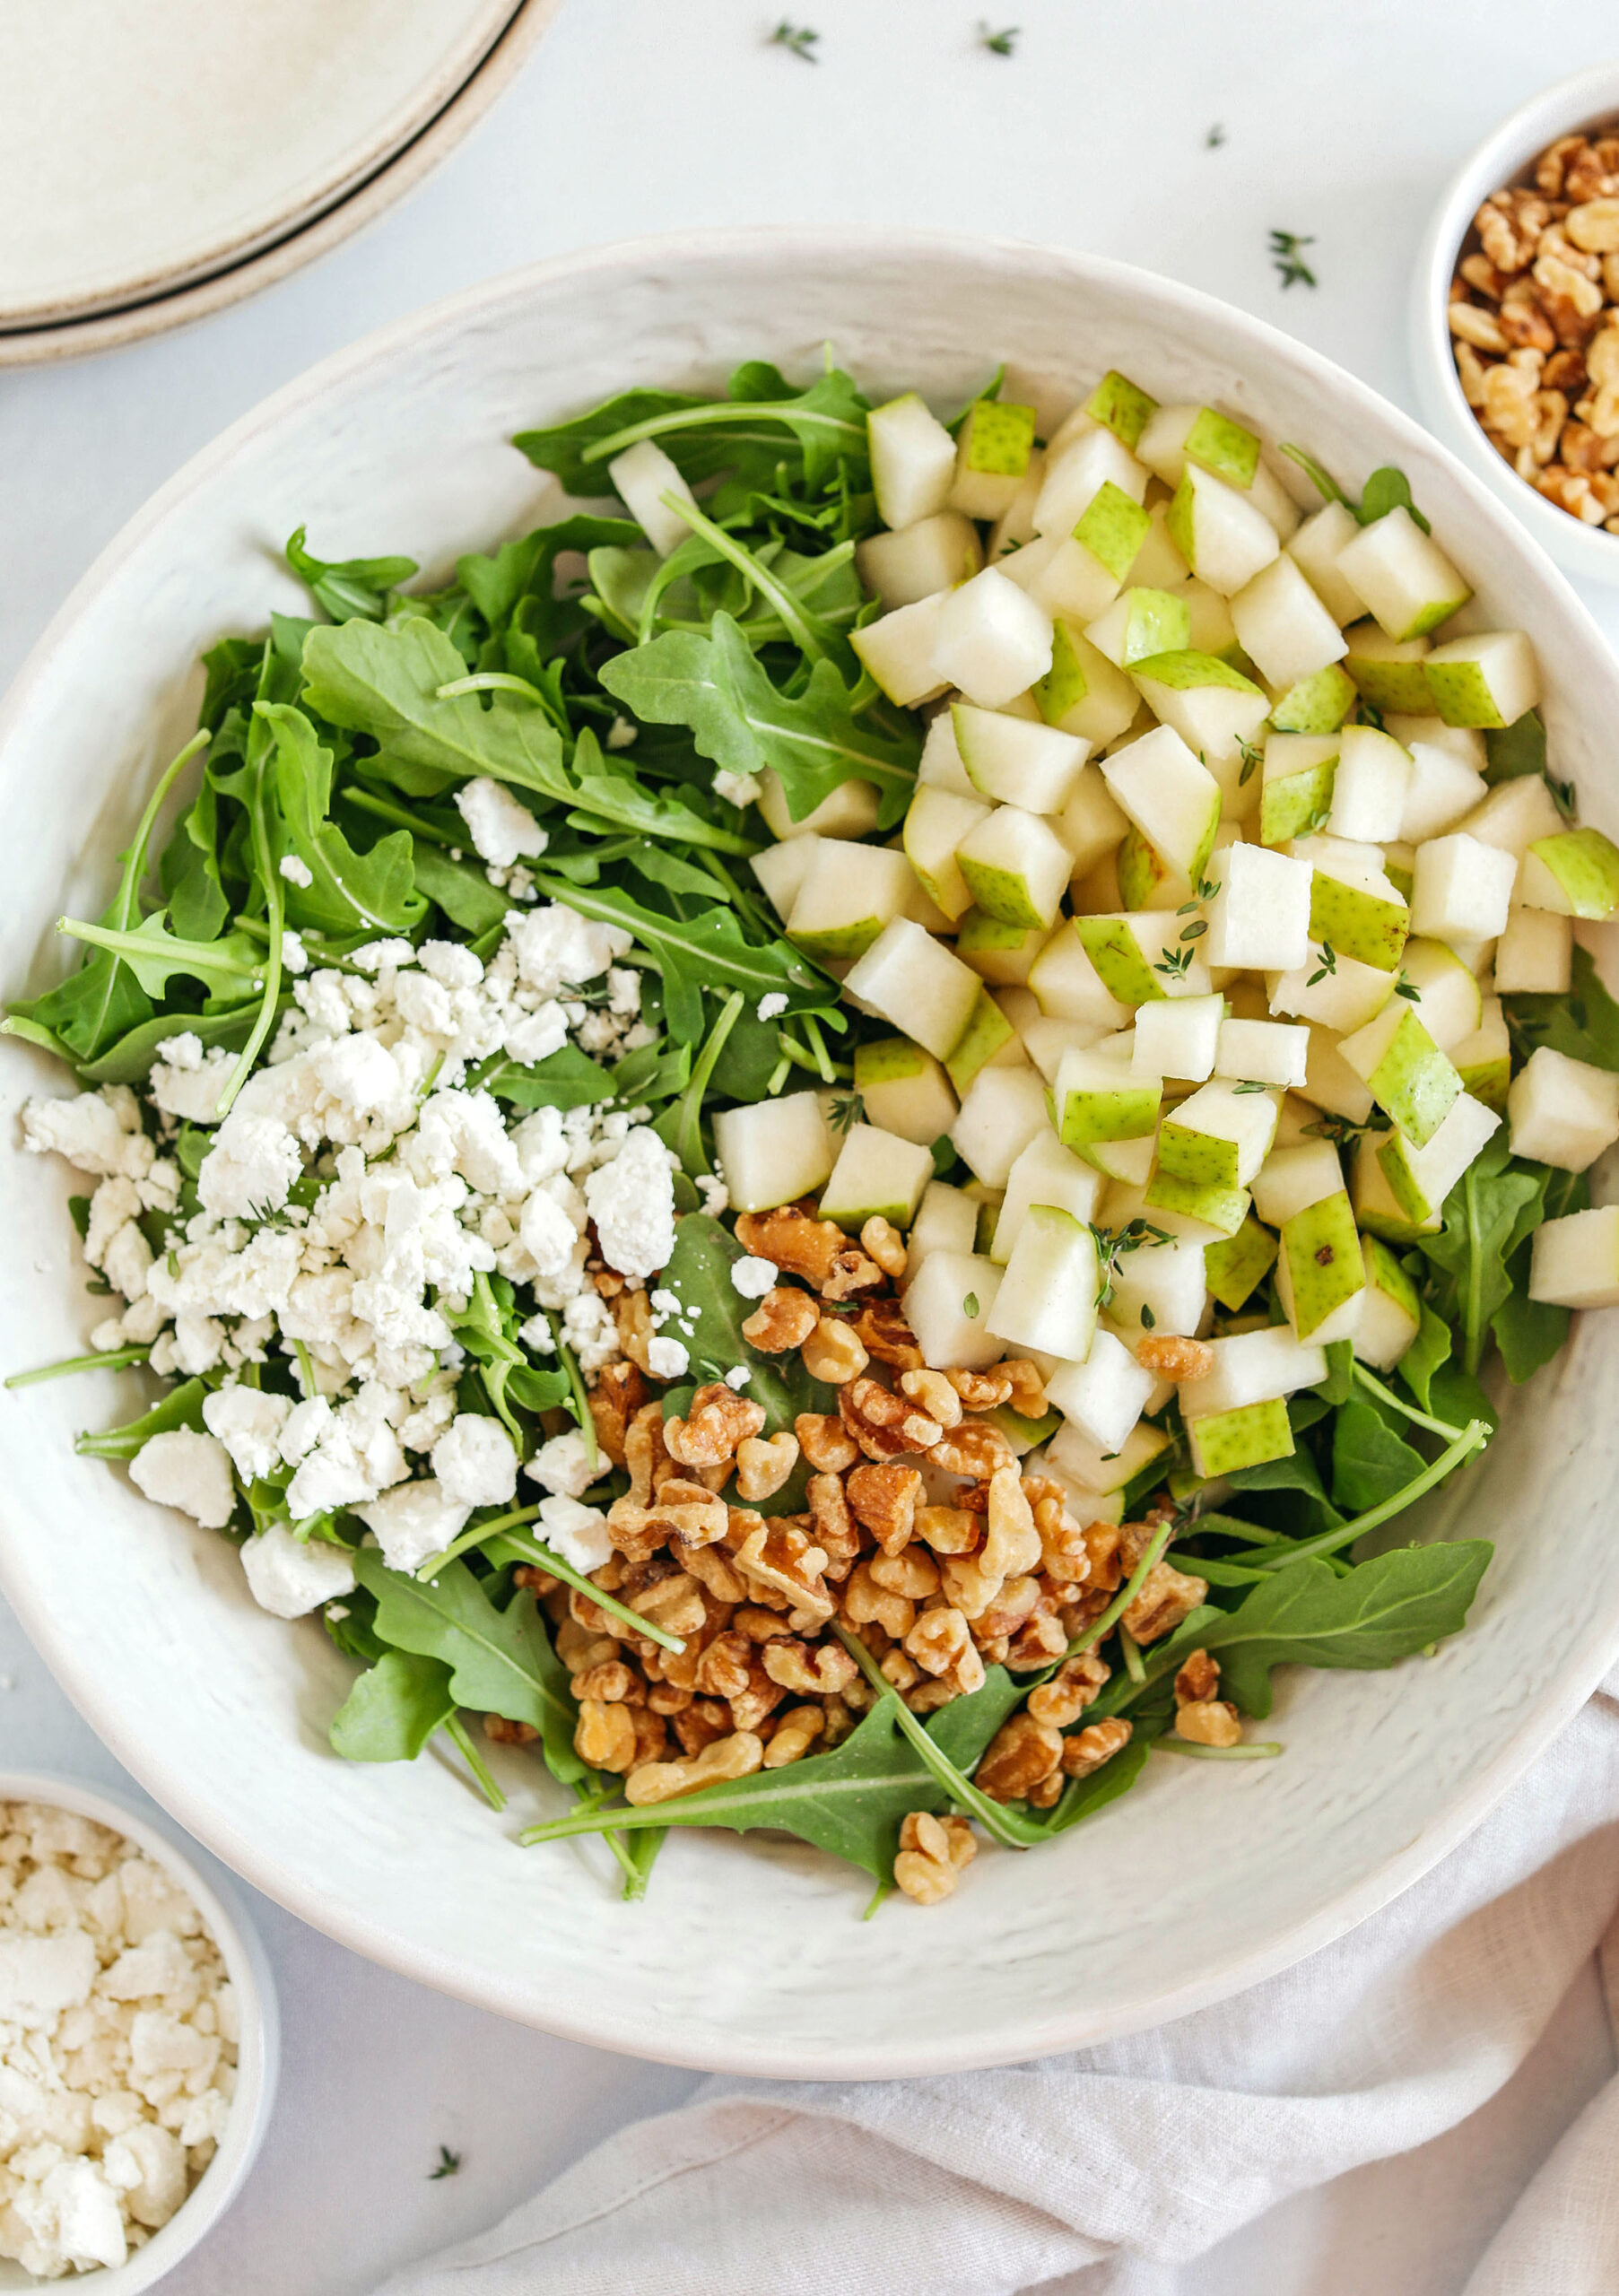 This simple Pear and Arugula Salad is made with fresh arugula, chopped pears, creamy goat cheese and crunchy pecans all tossed with a bright and lemony honey vinaigrette!  The perfect fall salad that is super easy to throw together!